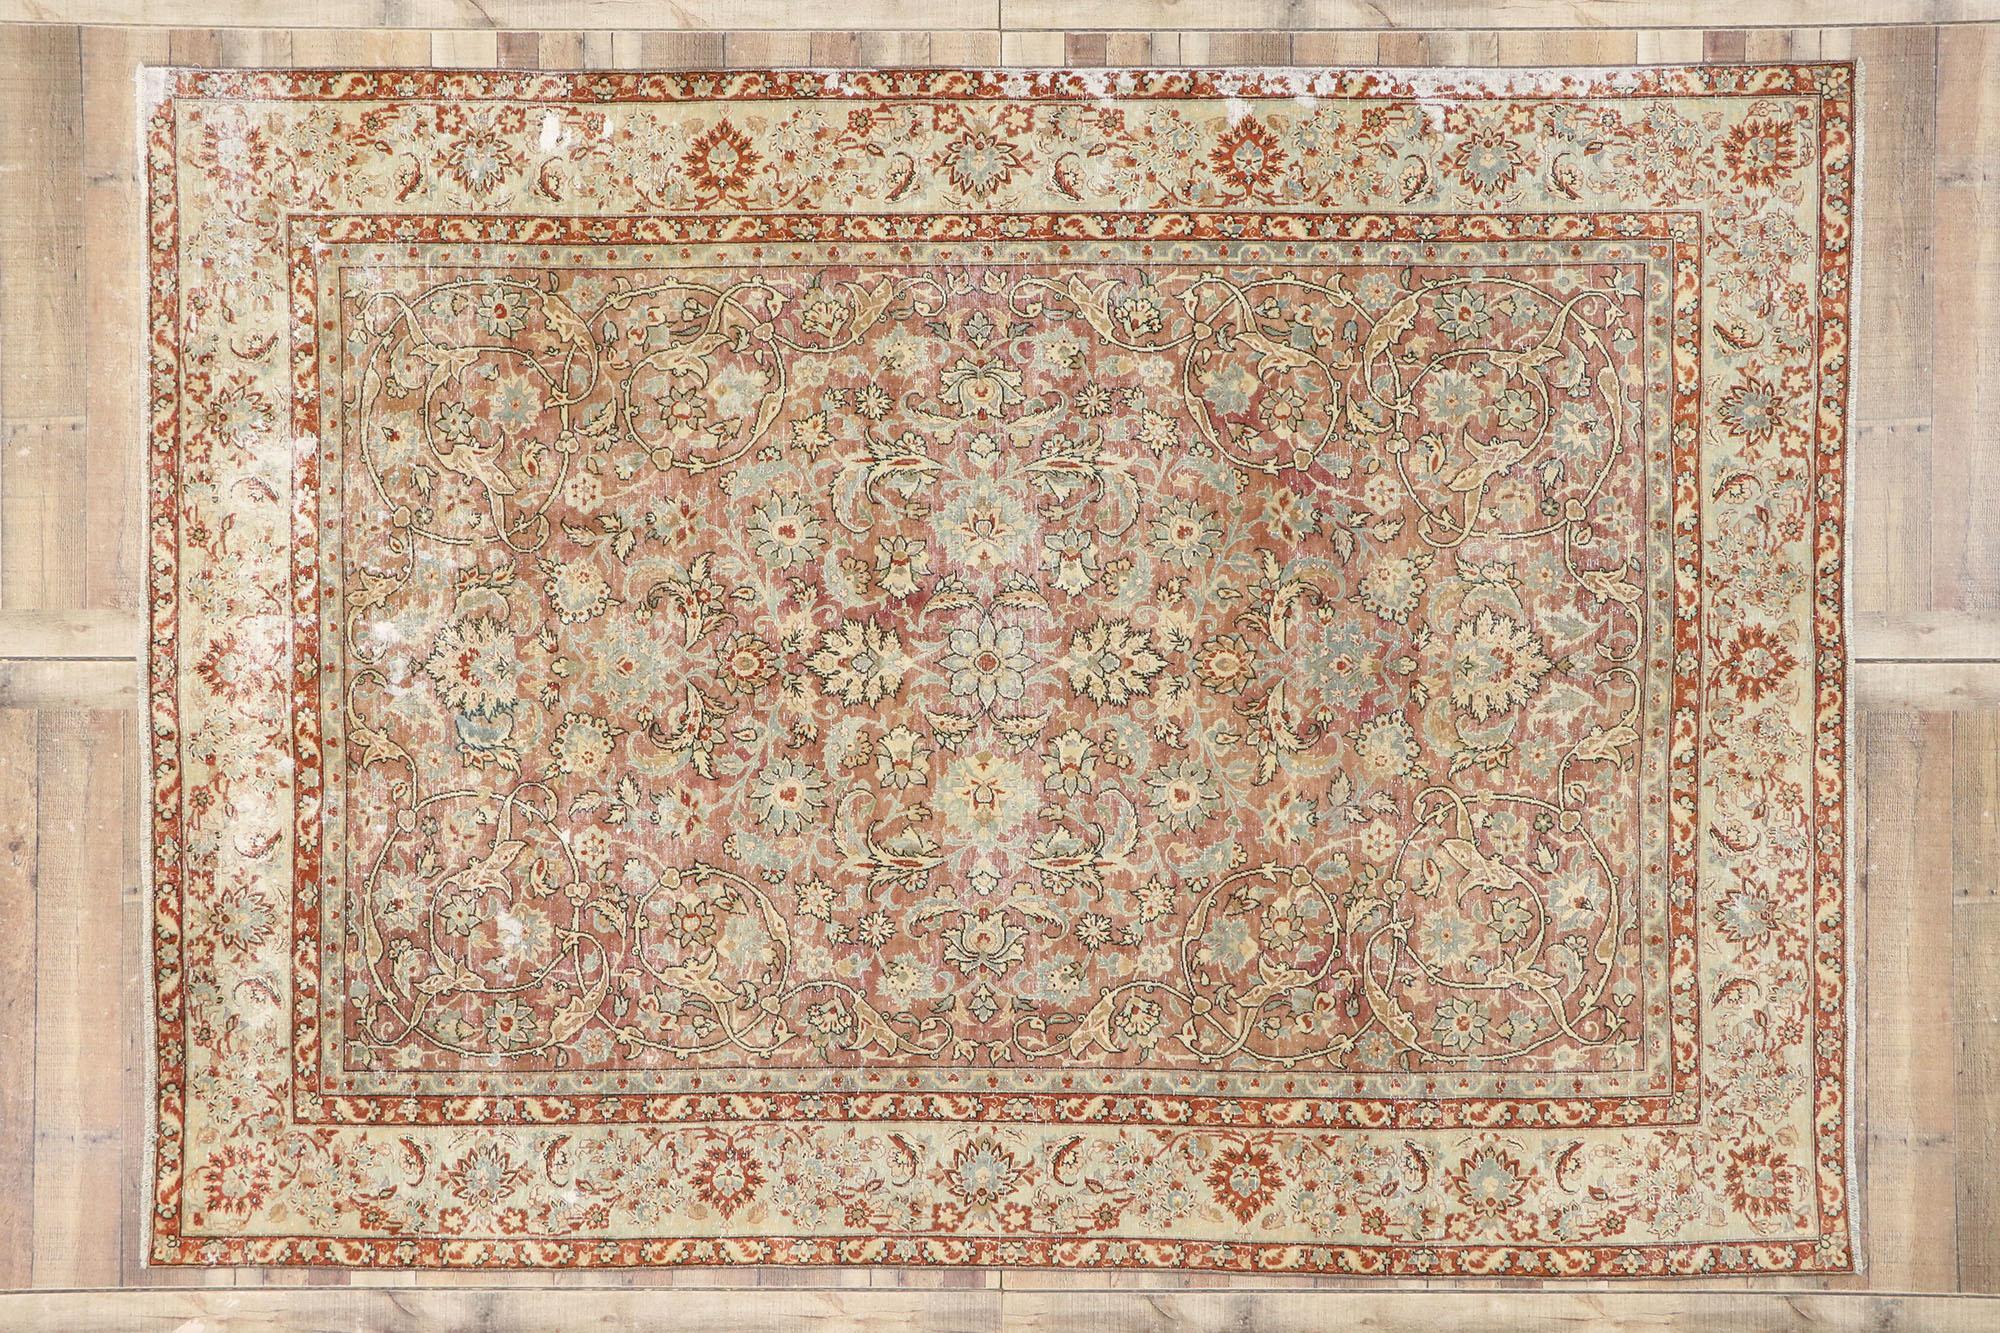 Wool Distressed Antique Persian Tabriz Rug with Rustic Italian Tuscan Style For Sale